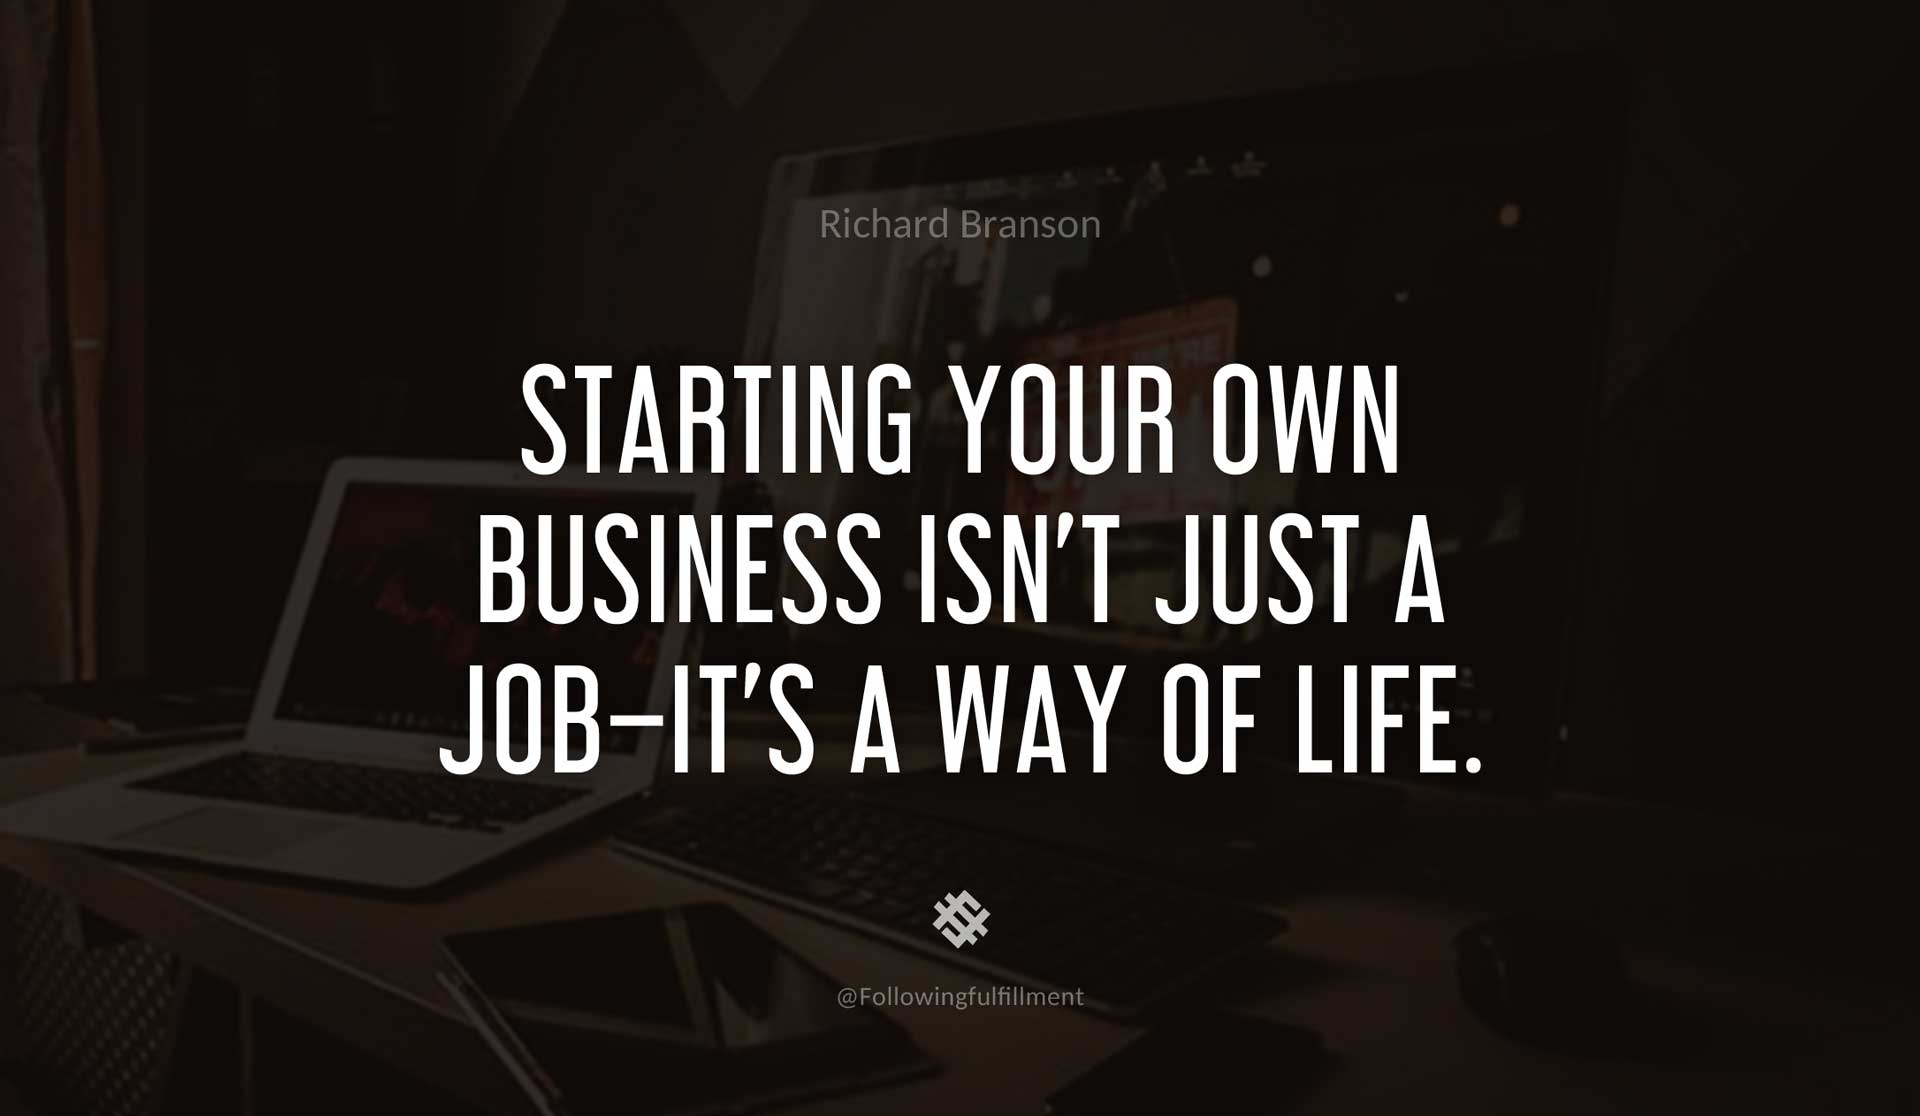 Starting-your-own-business-isn't-just-a-job-it's-a-way-of-life.--RICHARD-BRANSON-Quote.jpg